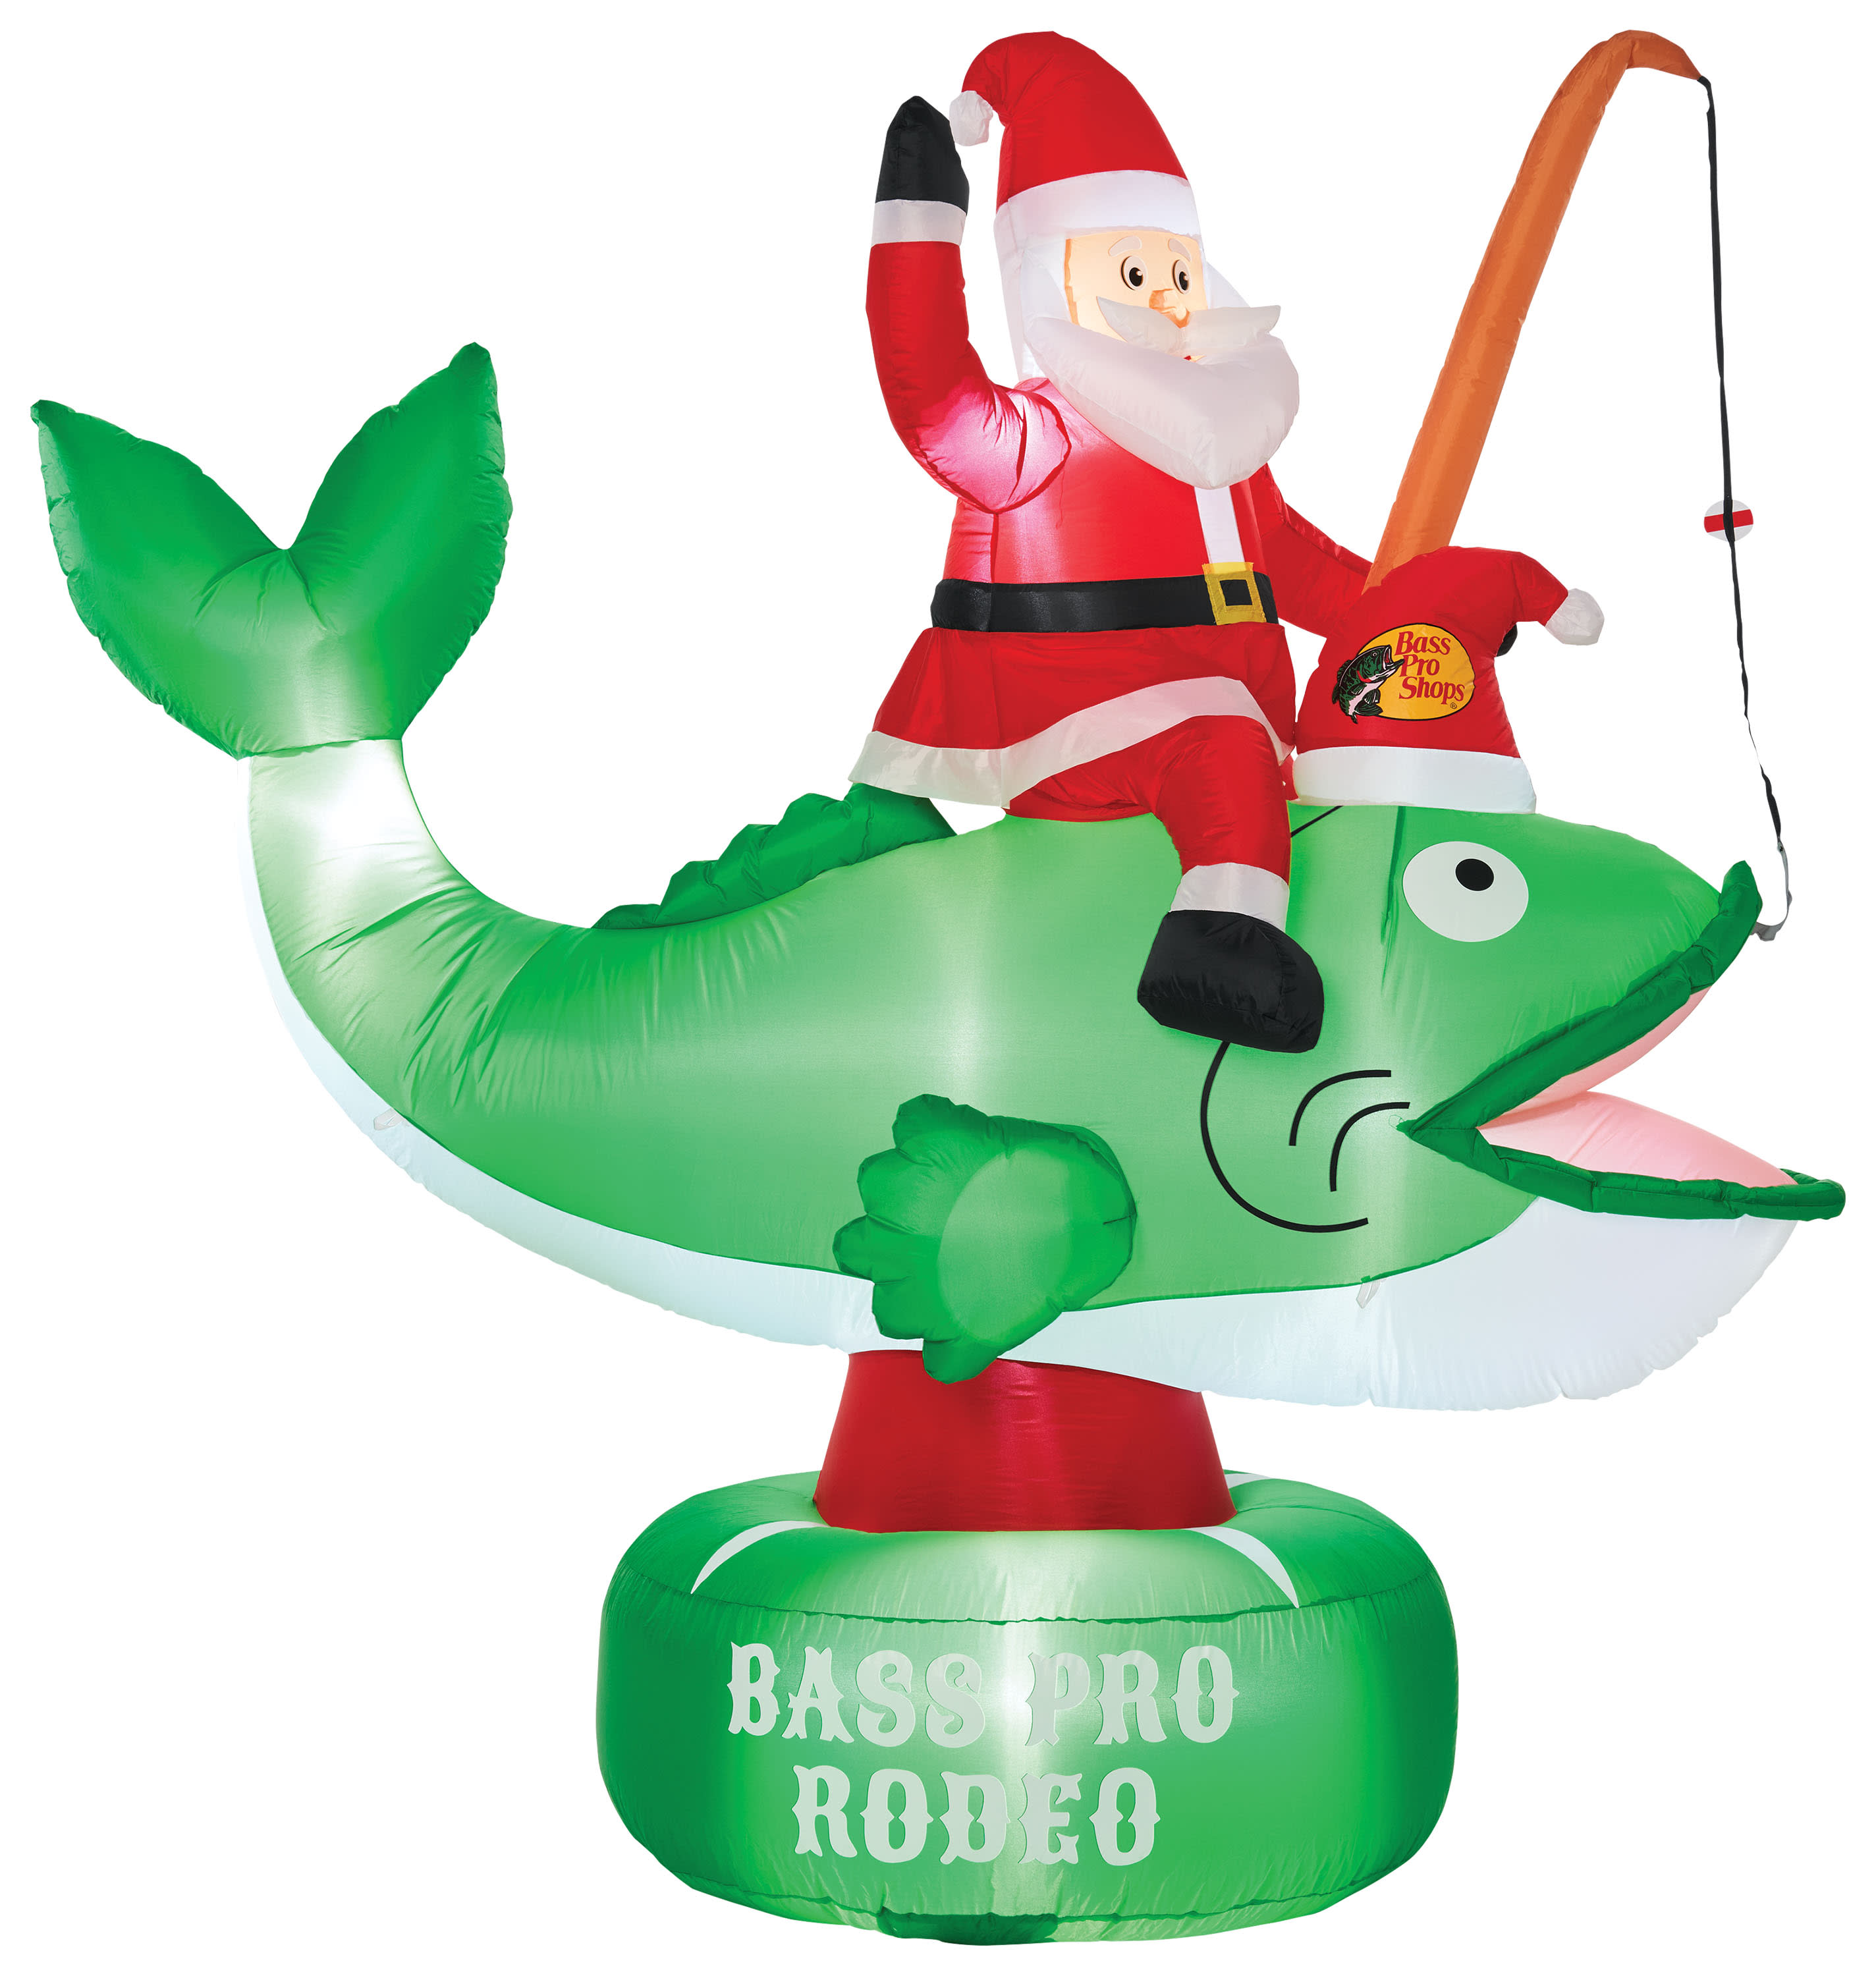 Bass Pro Shops® Bass Pro Rodeo Inflatable